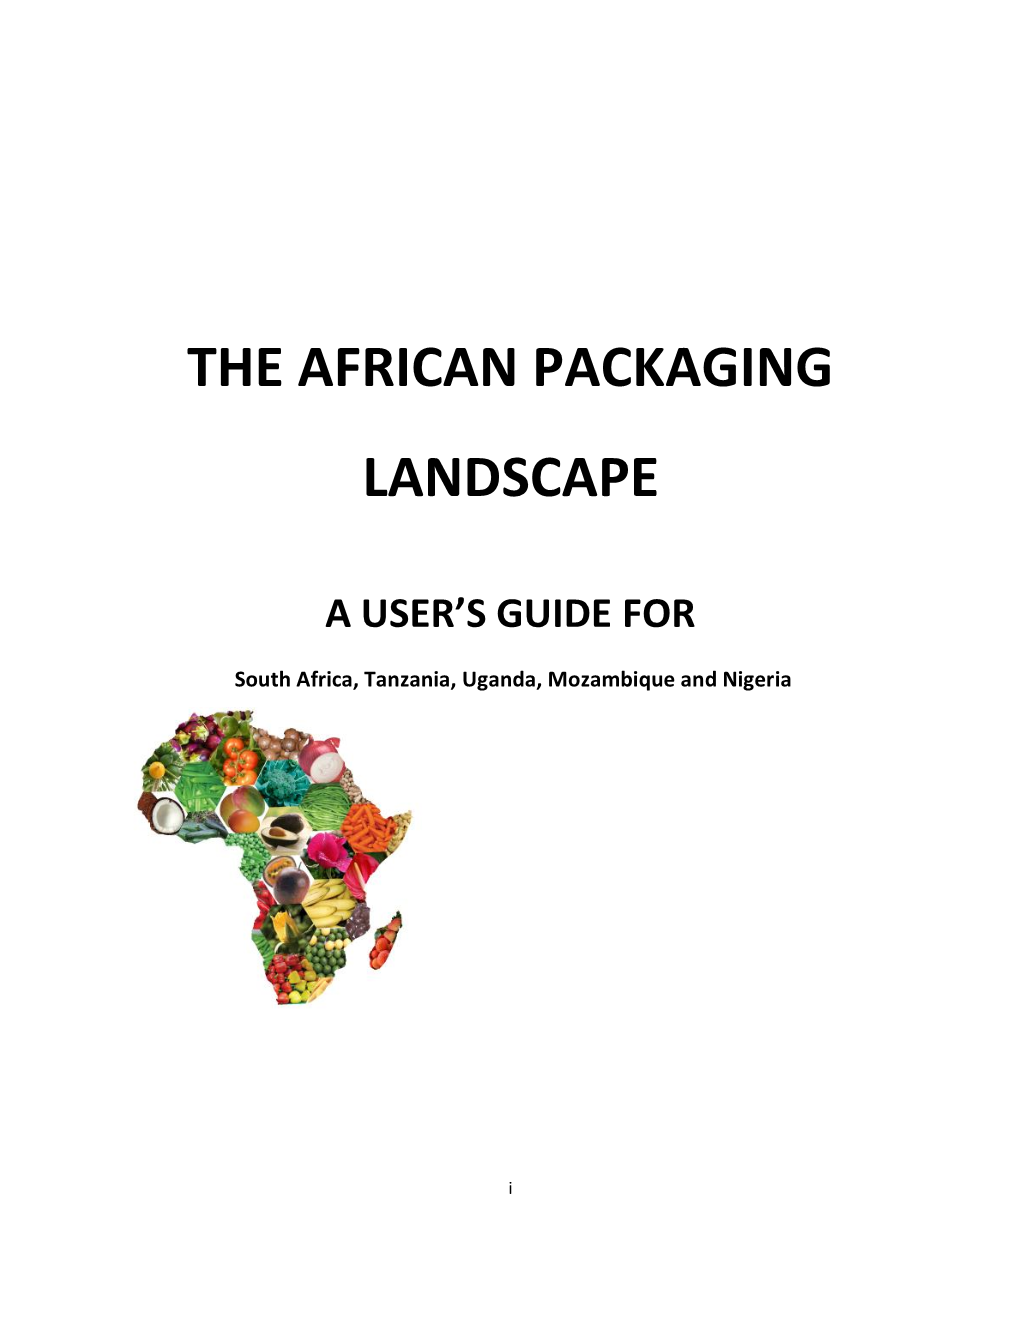 The African Packaging Landscape